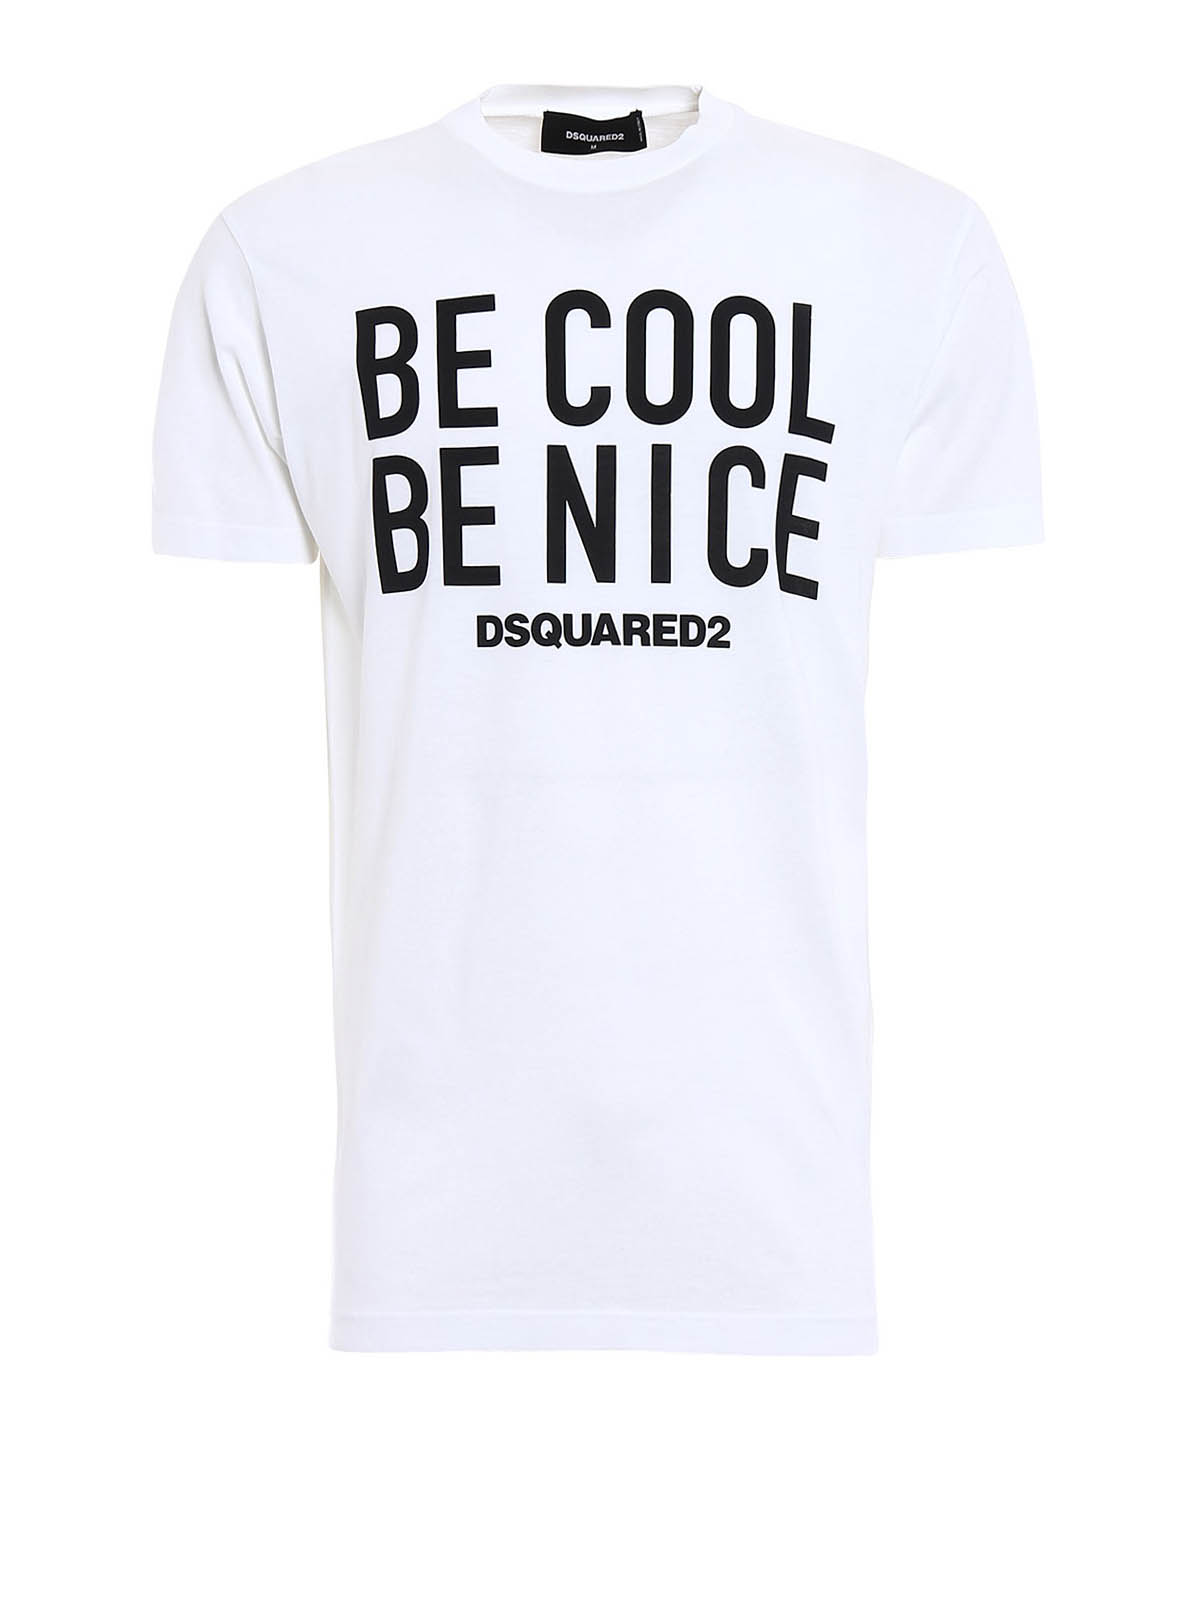 be cool be nice dsquared2